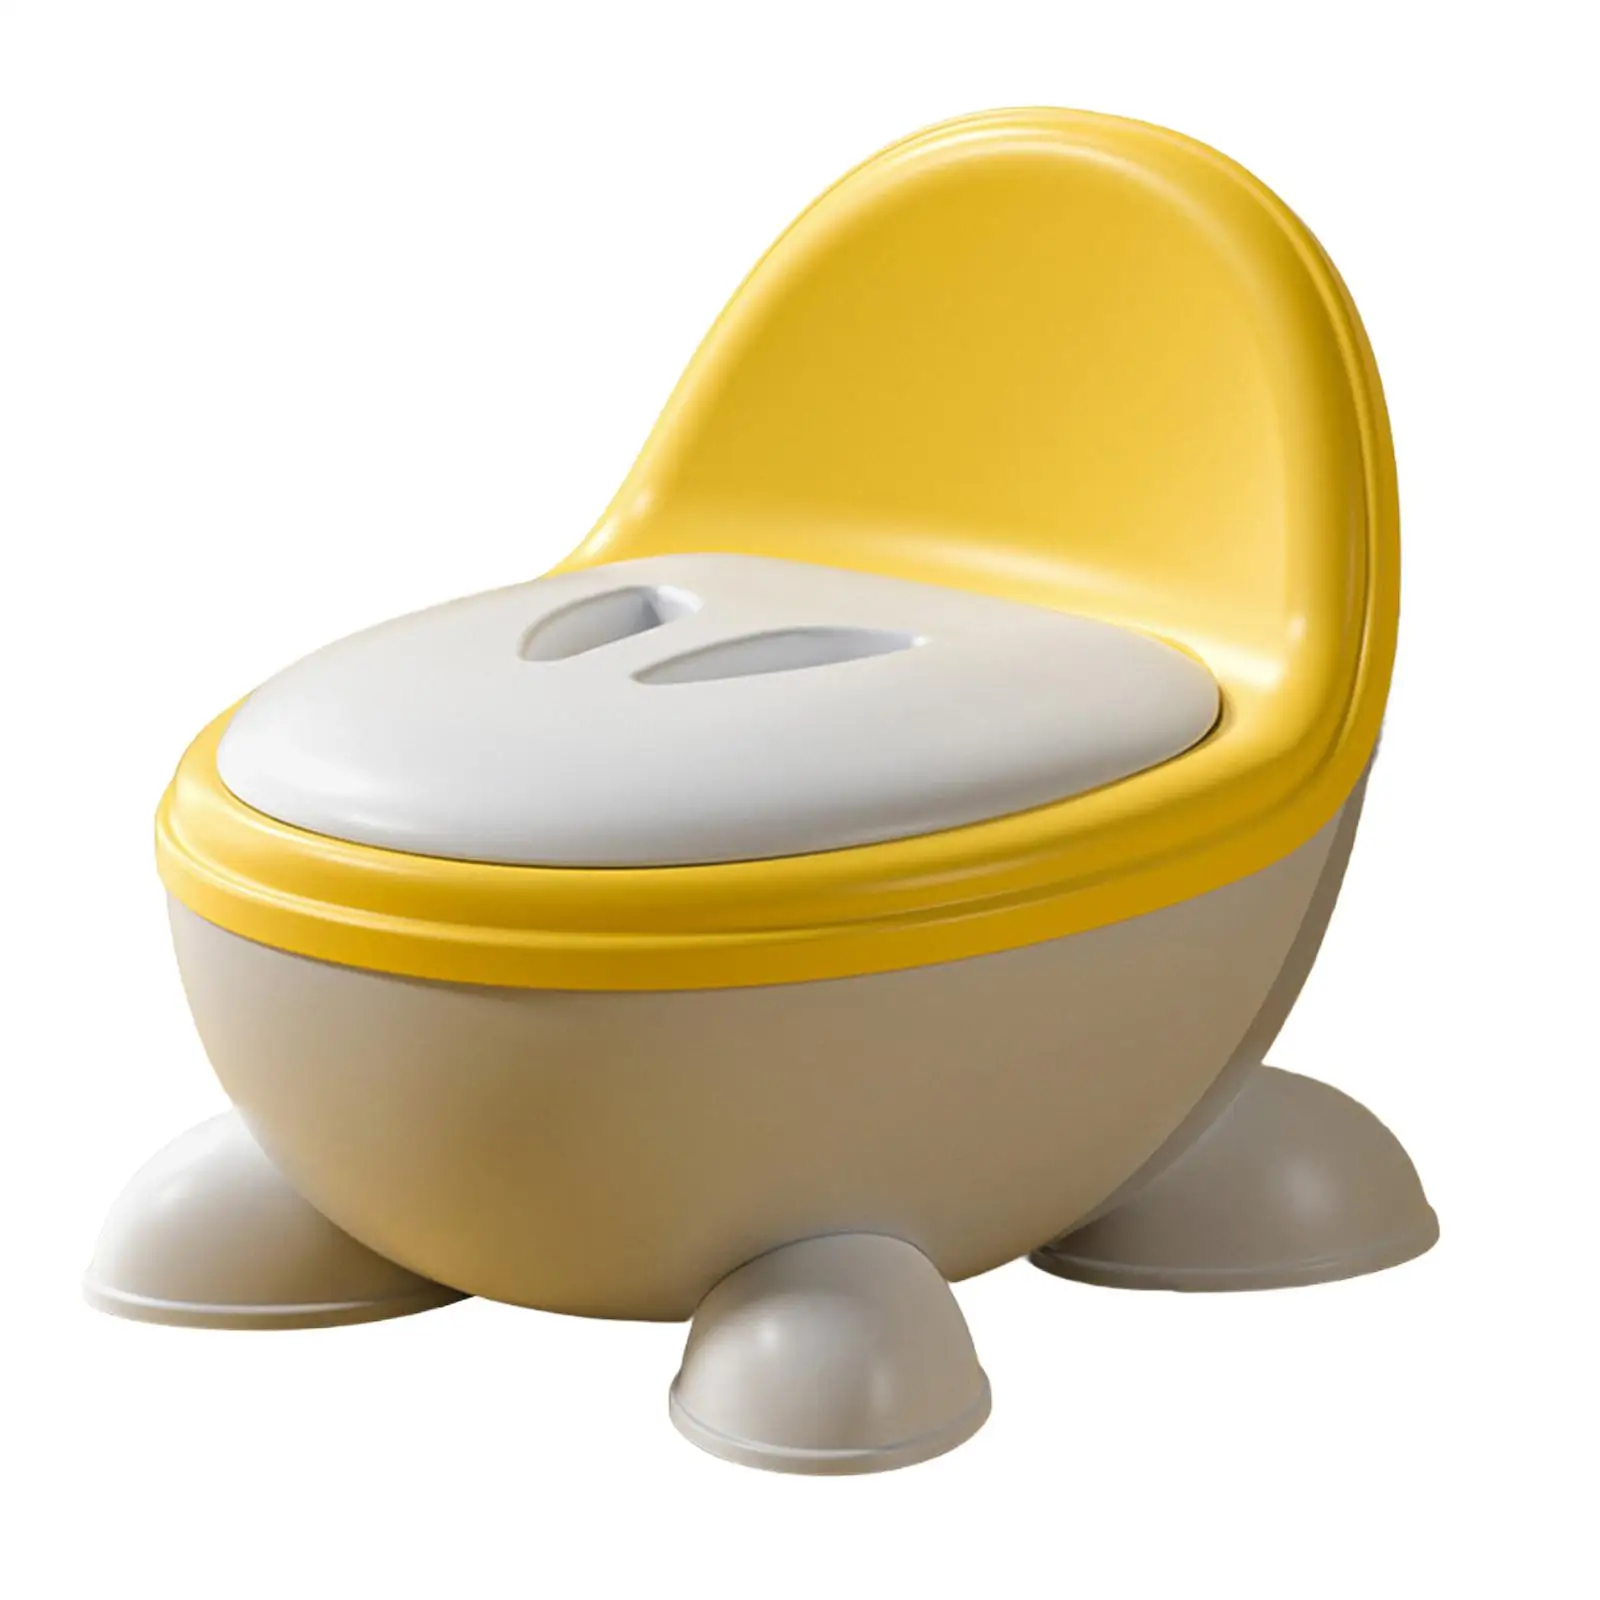 Potty Trainer Toilet Stable Removable Potty Pot for Travel Kids Boys Girls